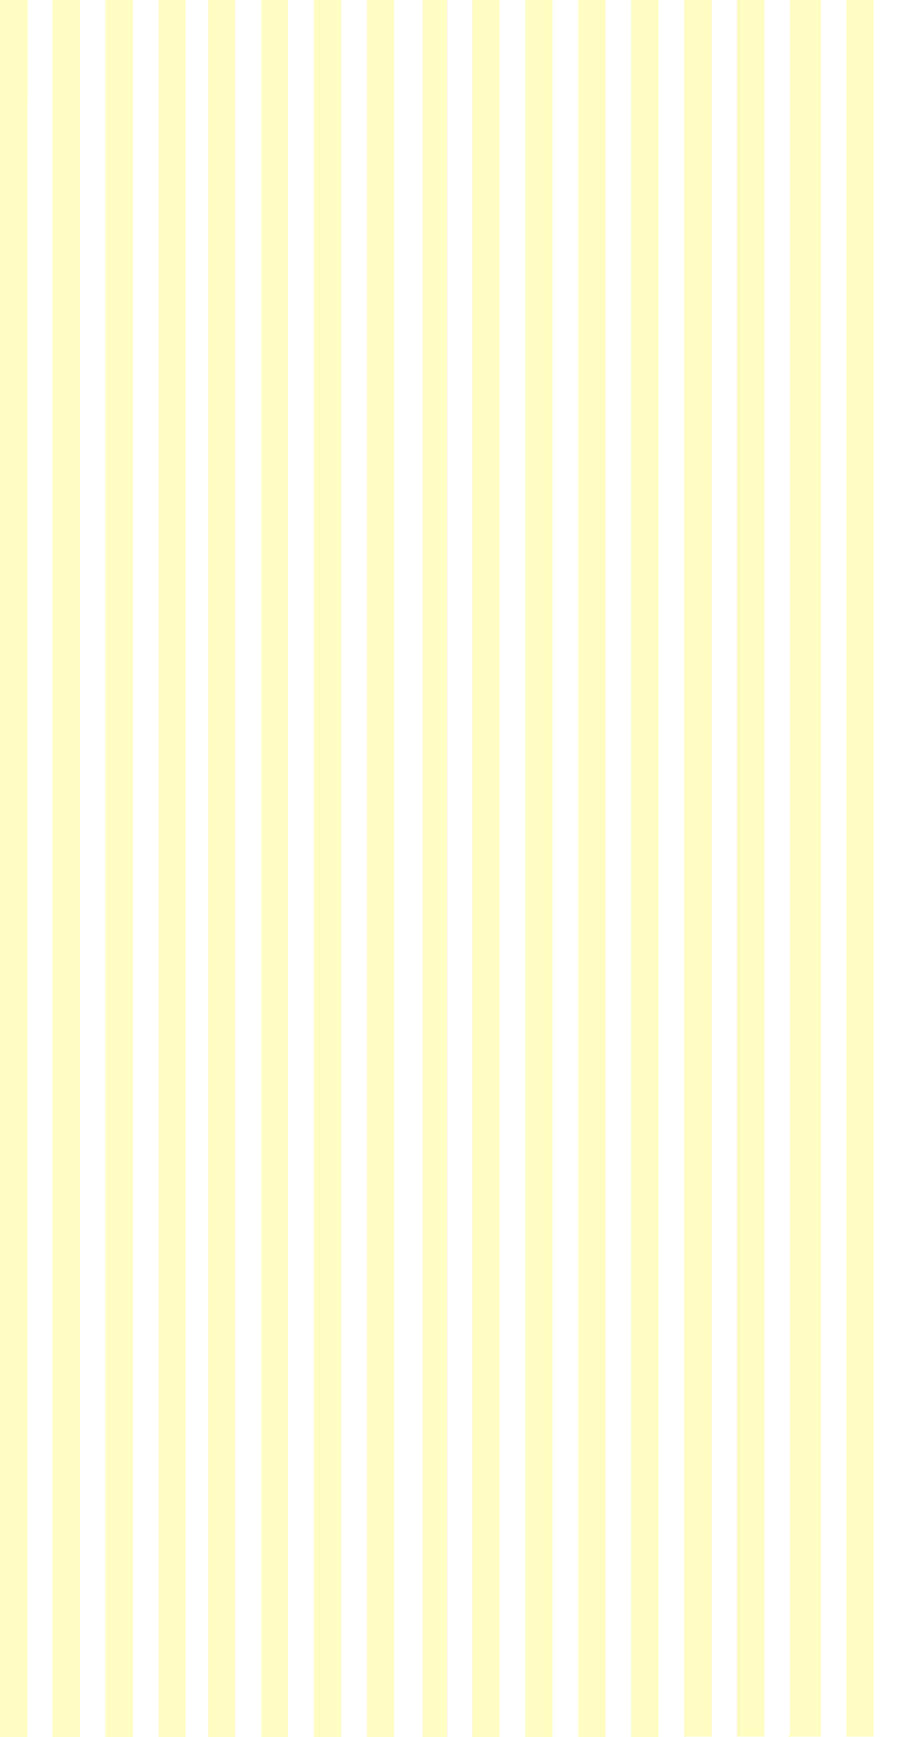 A Yellow And White Striped Background